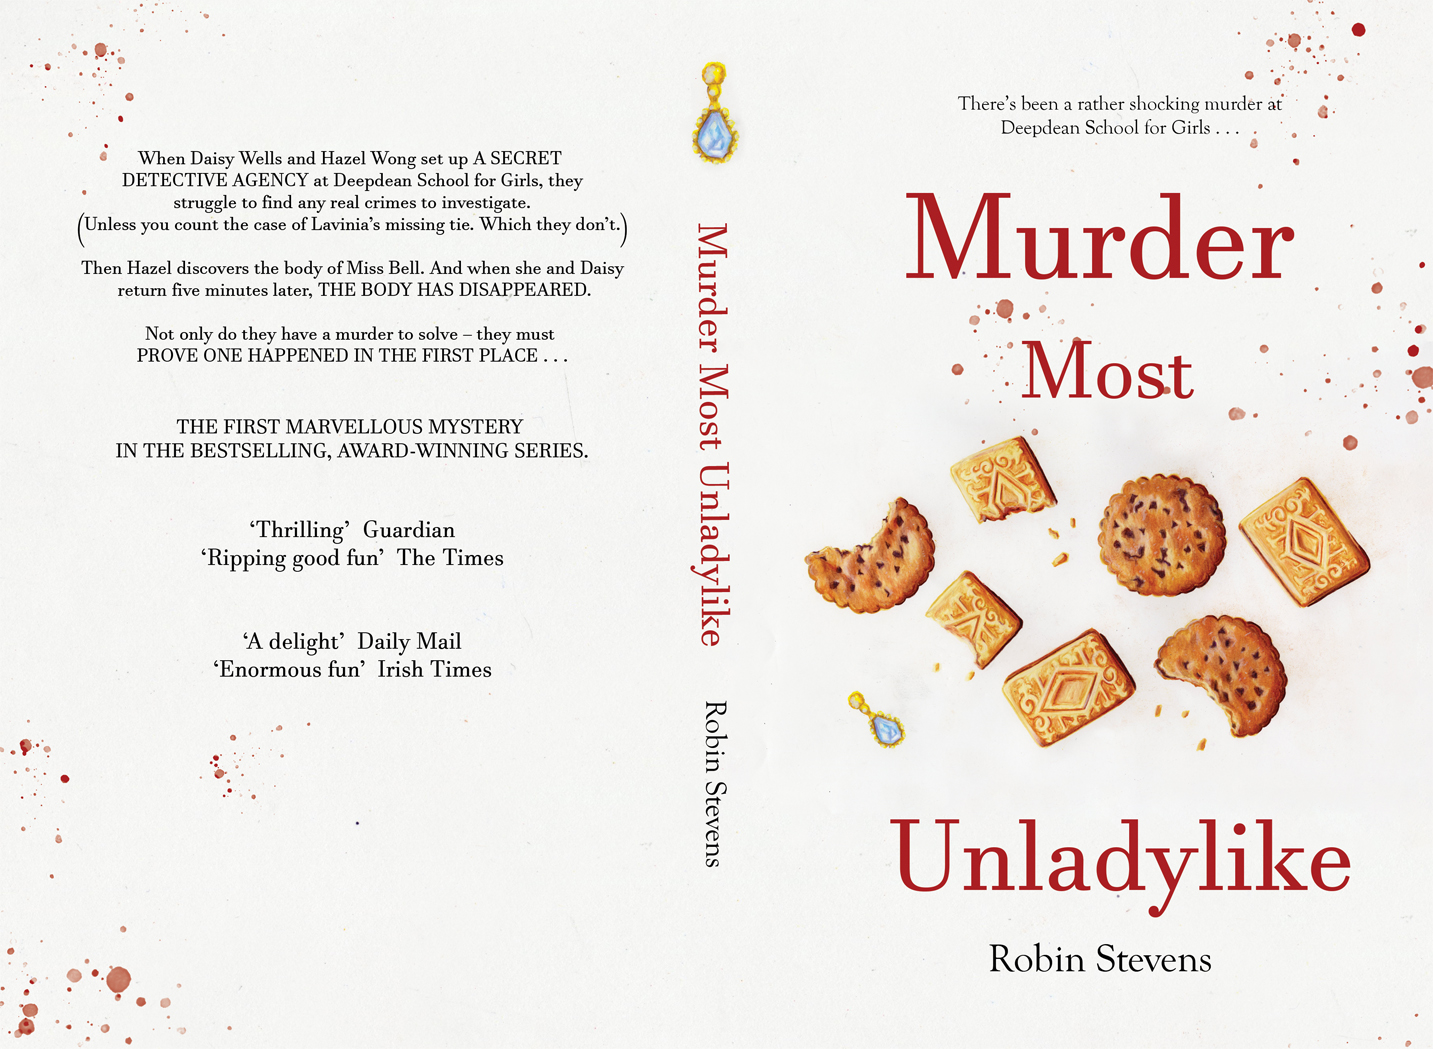 “Murder Most Unladylike”. Full book cover for “Murder Most Unladylike”, by Robin Stevens, following students investigating a murder at Deepdean School for Girls. Alternative illustrations are on my website.